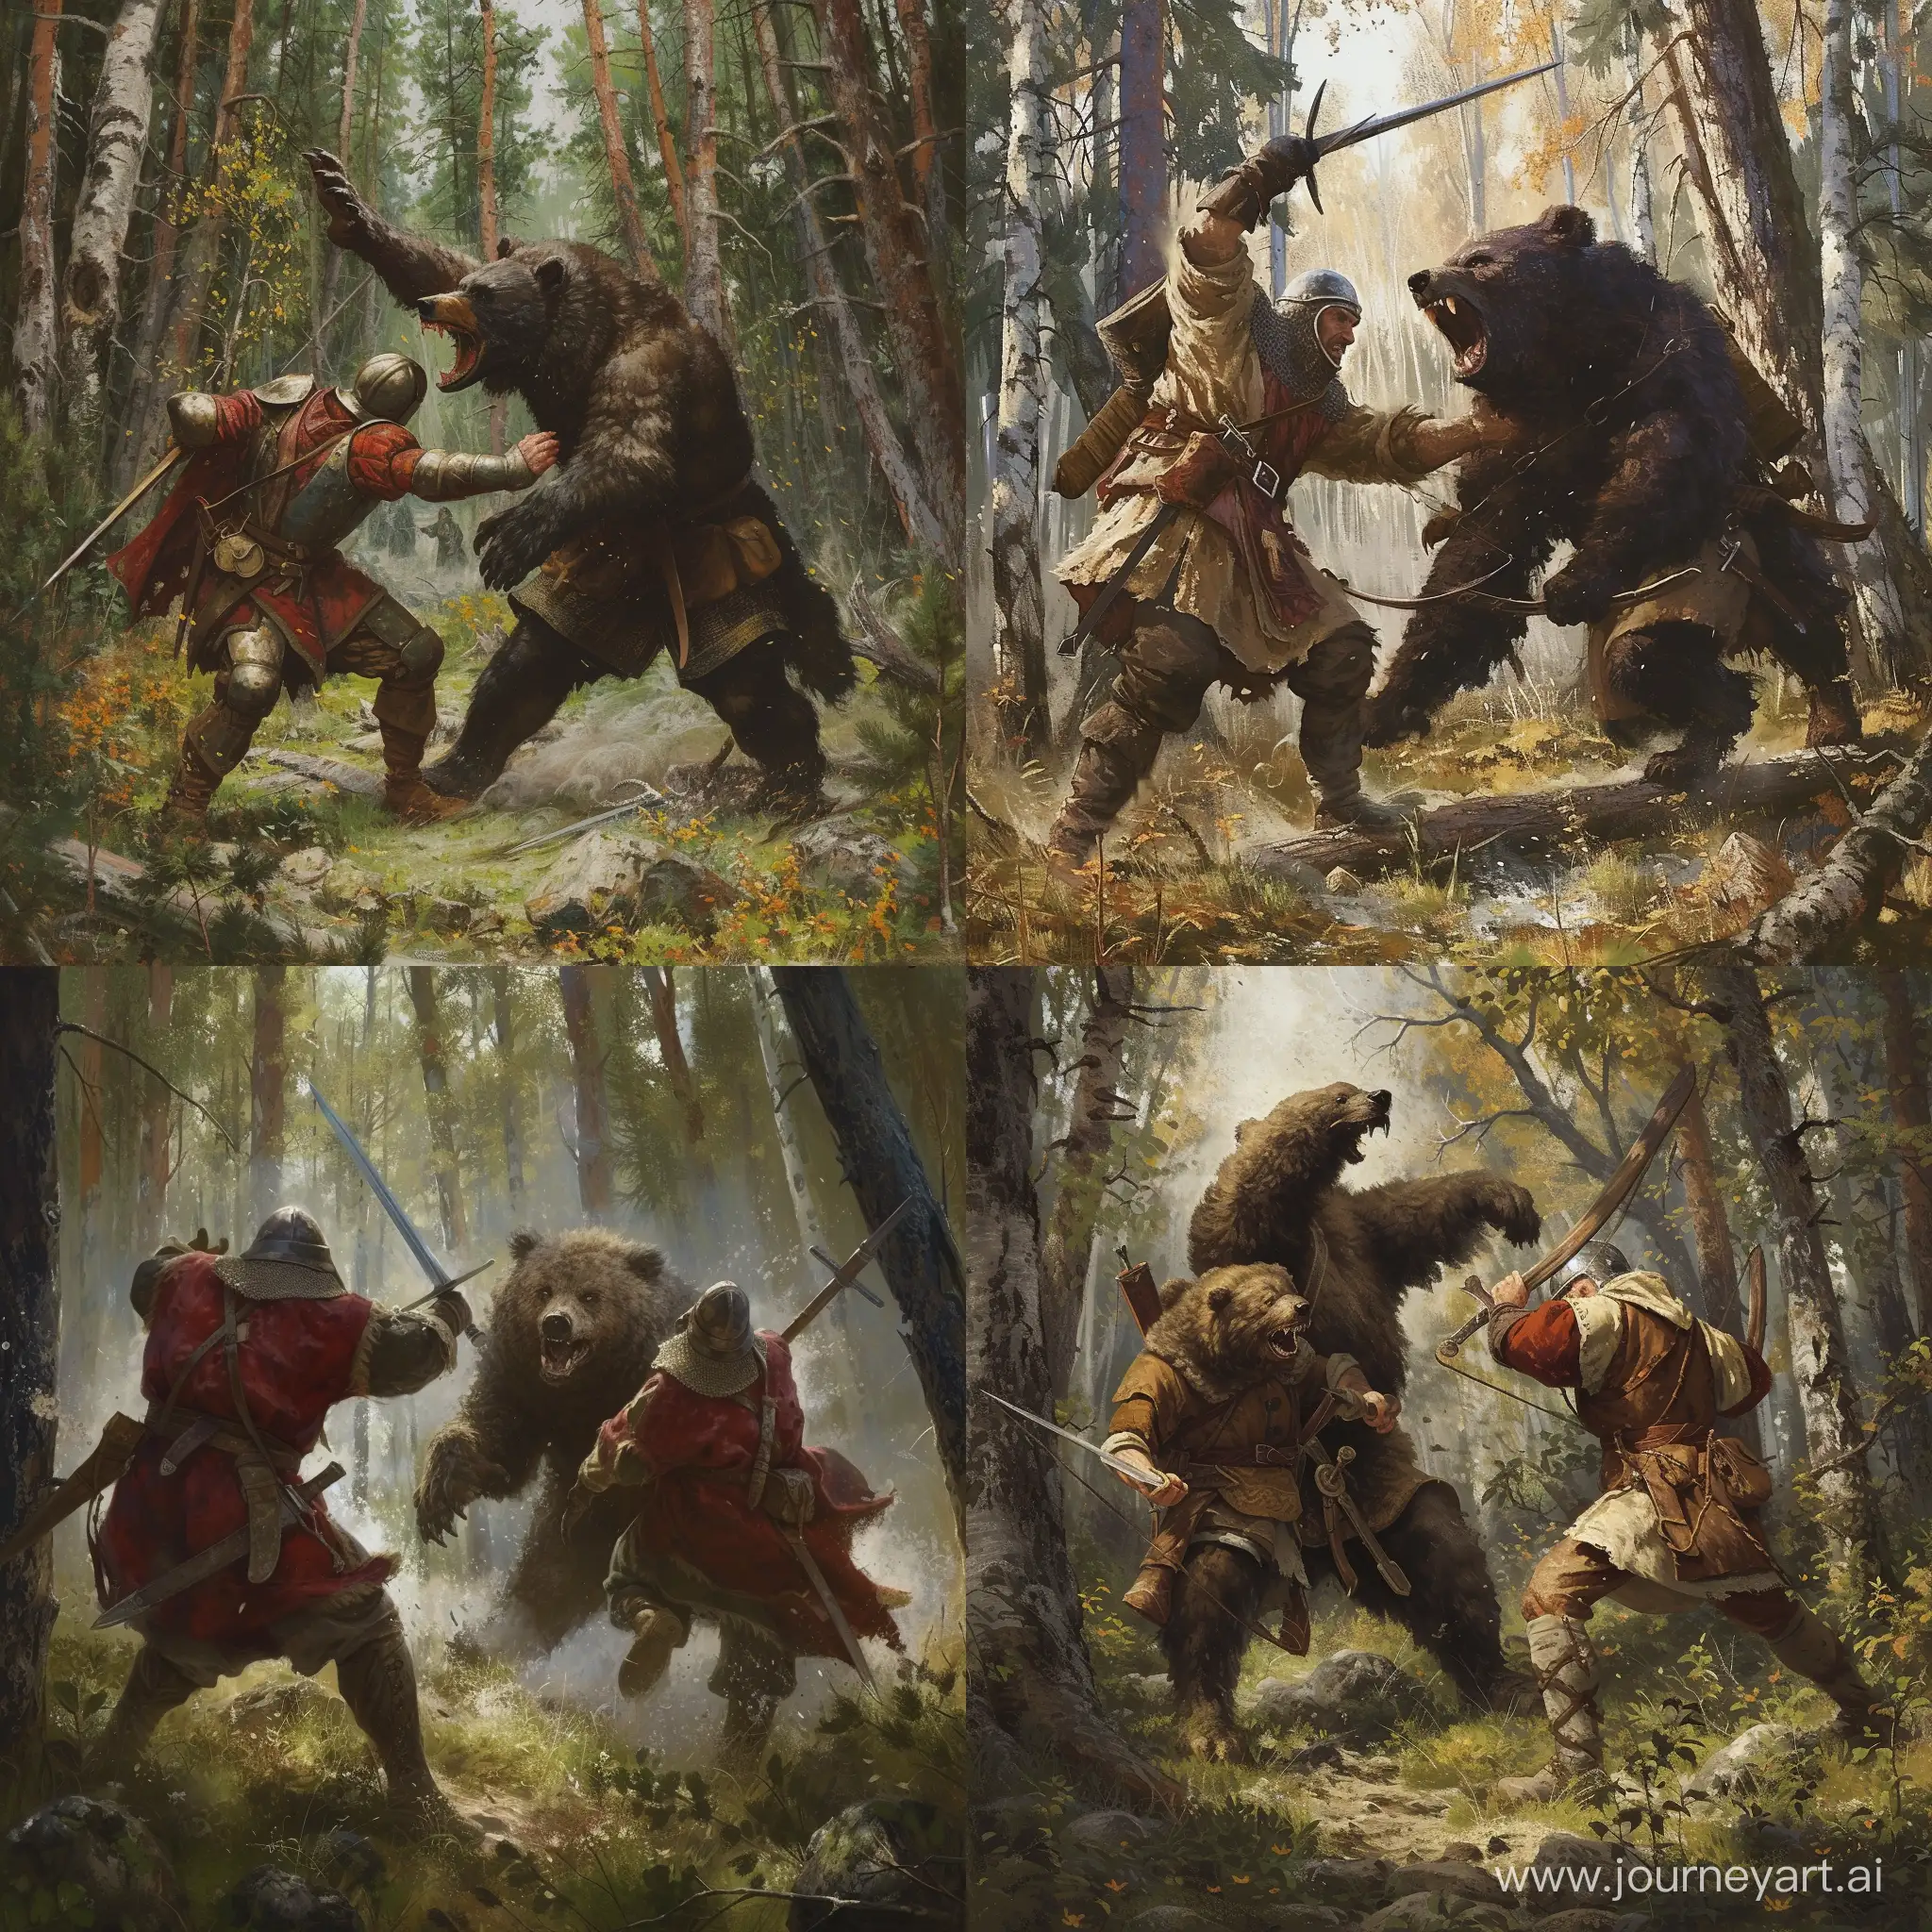 Intense-Battle-Medieval-Russian-Hunters-Confront-BearWerewolf-in-the-Forest